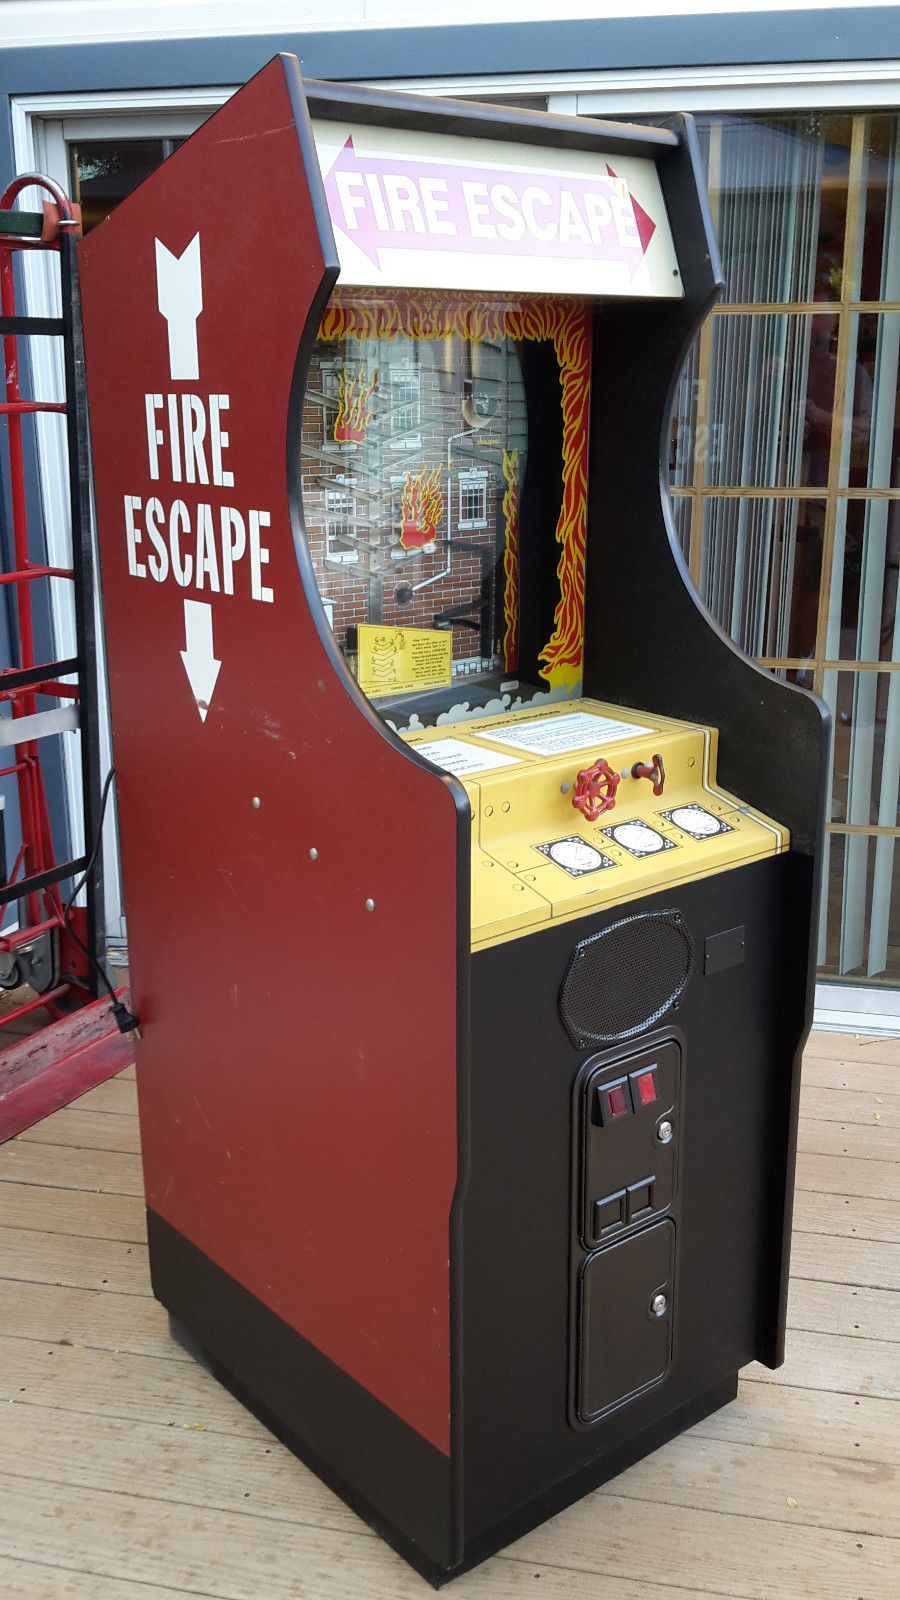 FIRE ESCAPE by MTG - Mech-Tronic Games - a "Game of Skill"